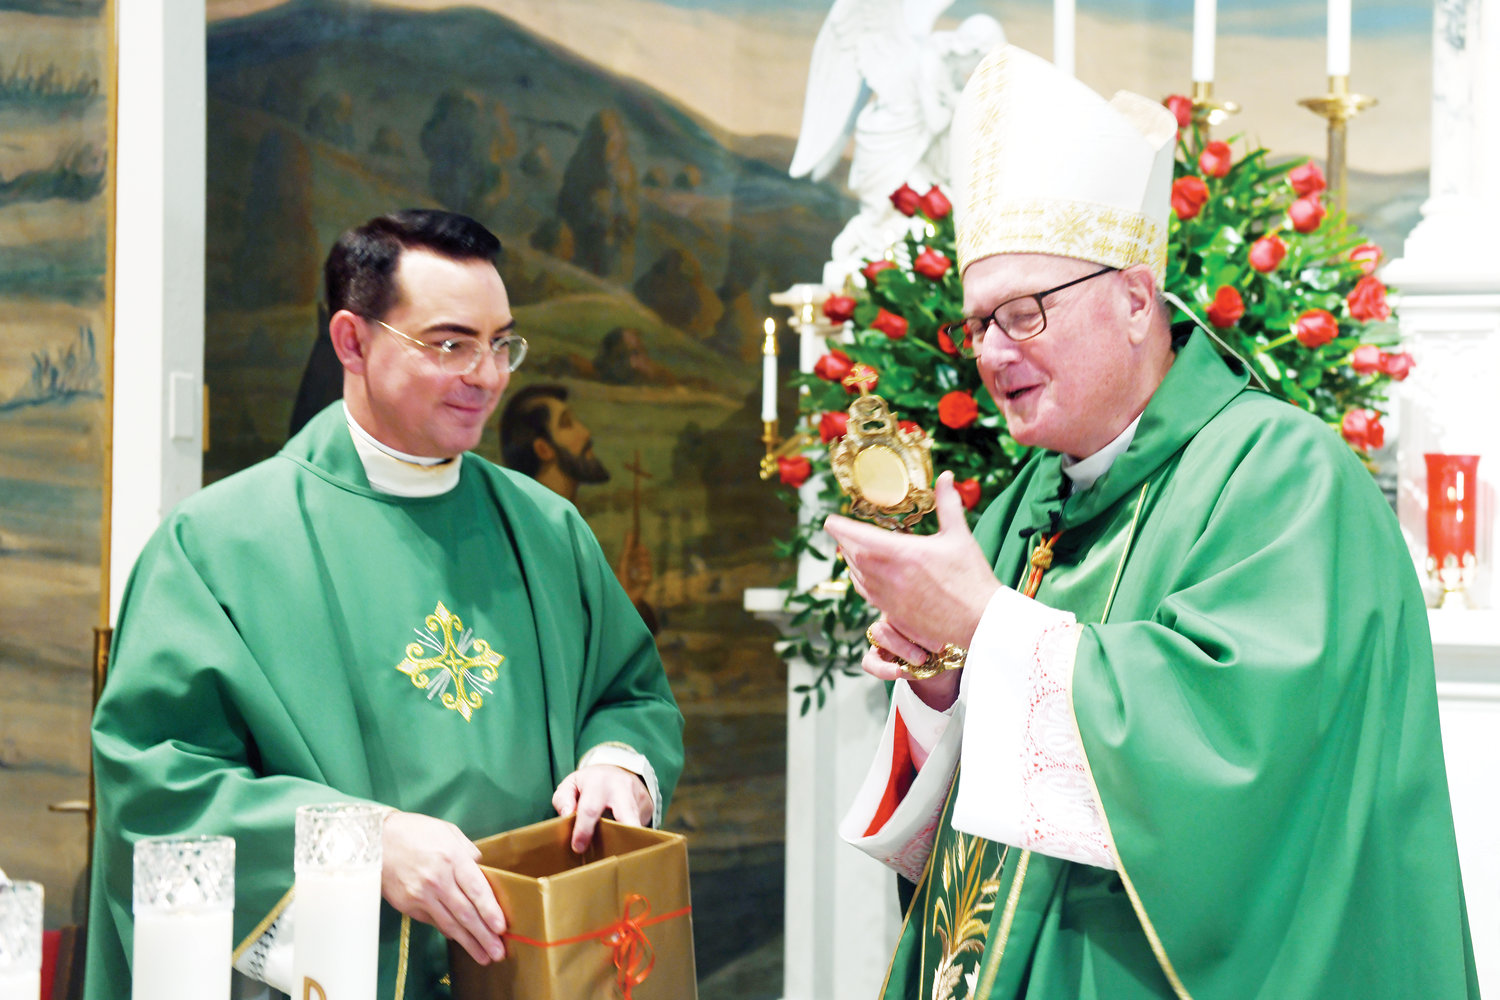 Father Chris Monturo, pastor of Sacred Heart-Our Lady of Pompeii parish, presents Cardinal Dolan with a relic of Mother Cabrini, a piece of the saint’s habit.